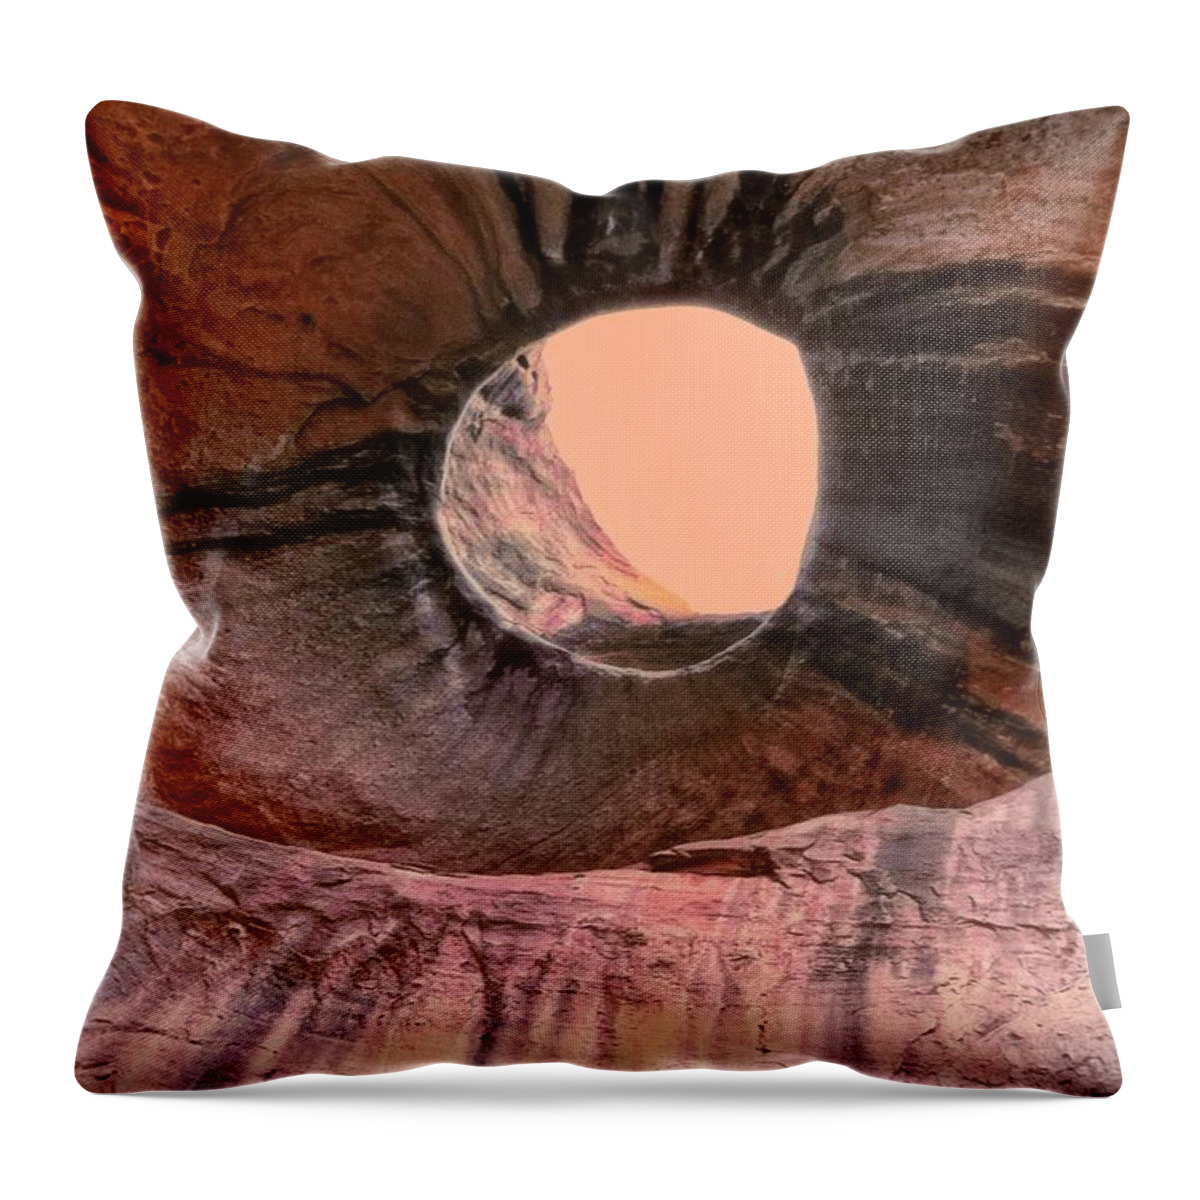 Monument Valley Throw Pillow featuring the photograph Always Light by Carol Whaley Addassi